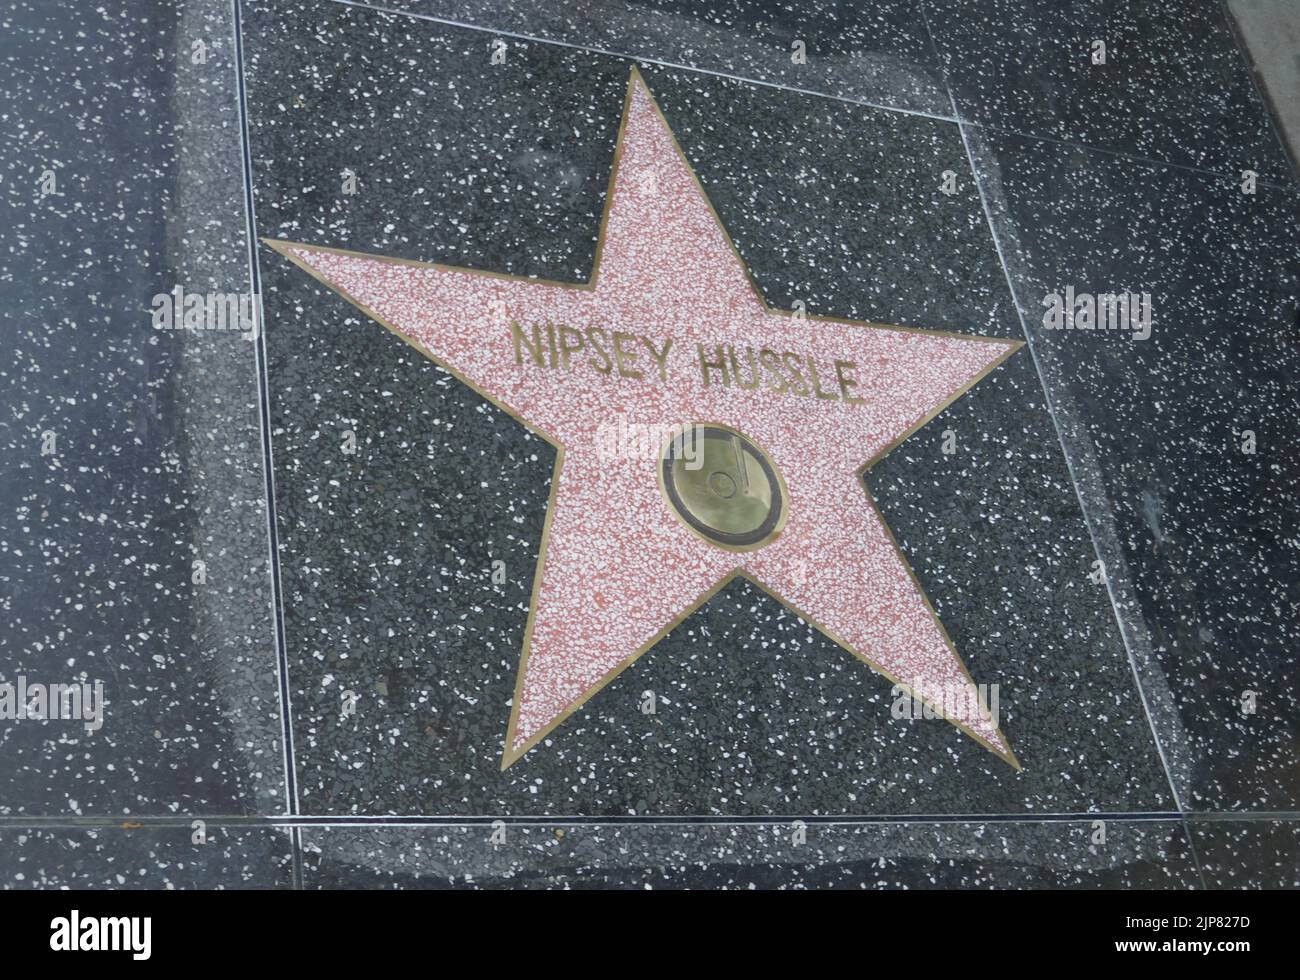 Los Angeles, California, USA 15th August 2022 Rapper Nipsey Hussle's Hollywood Walk of Fame Star on his 37th Birthday today on Hollywood Blvd on August 15, 2022 in Los Angeles, California, USA. Photo by Barry King/Alamy Stock Photo Stock Photo